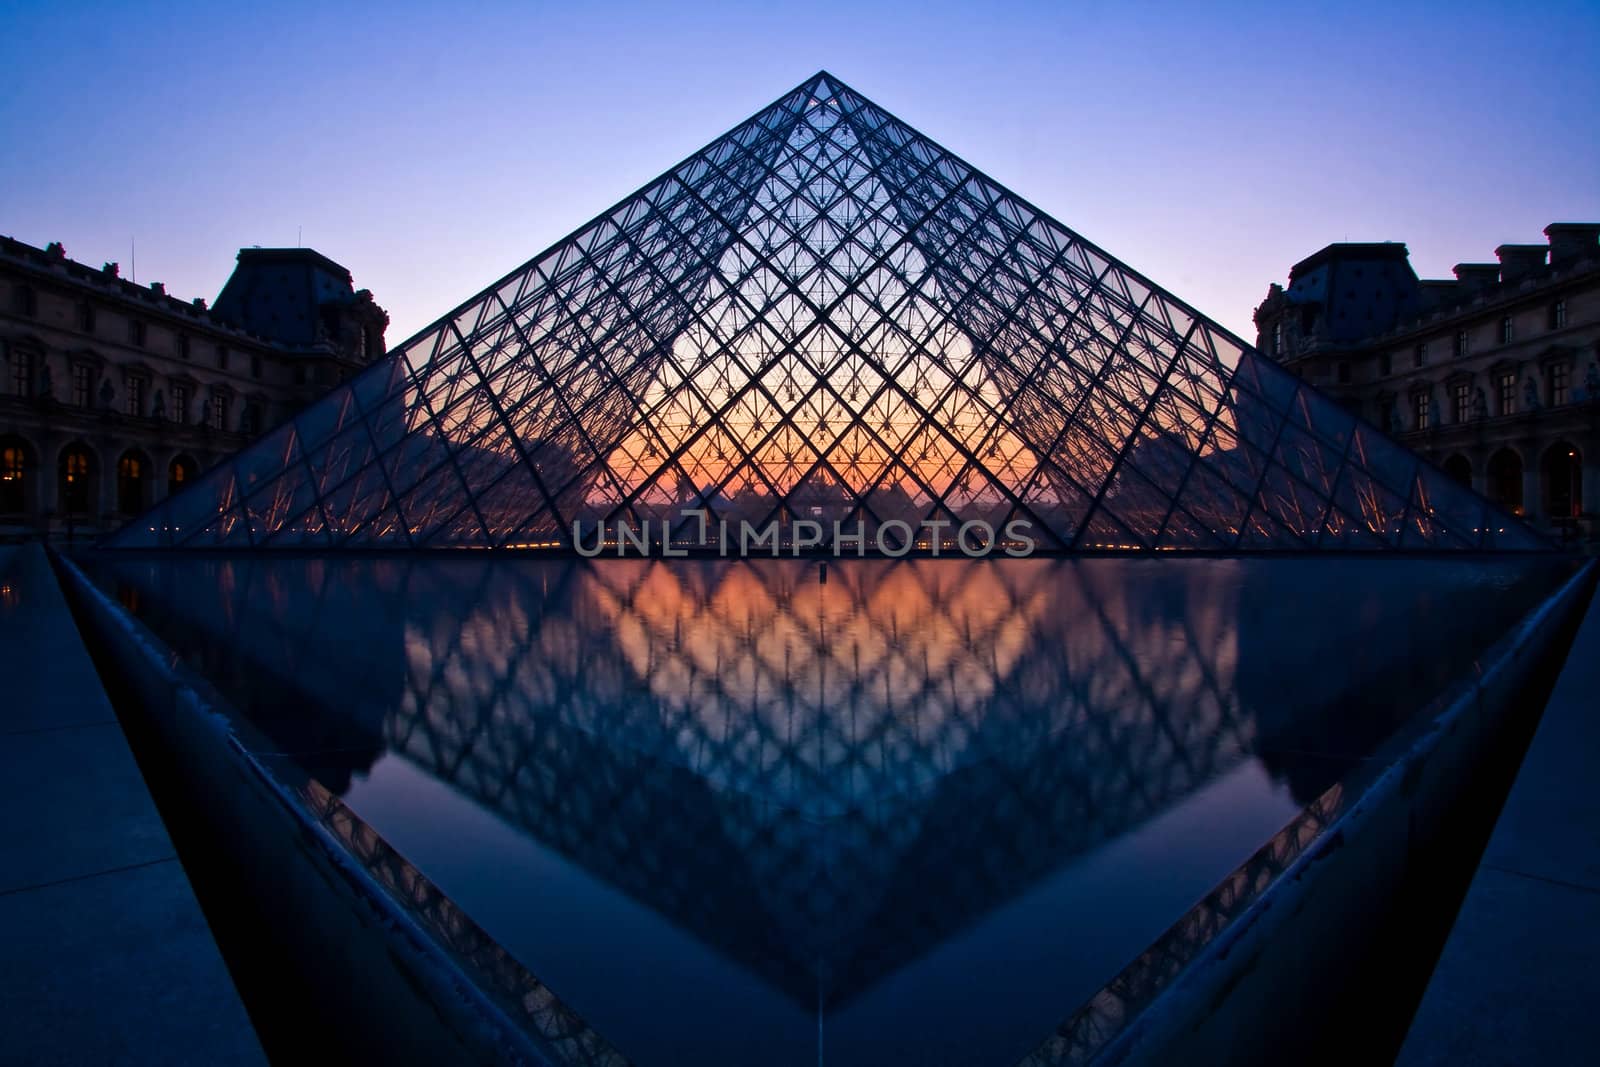 PARIS - APRIL 16: Silhouette of Louvre pyramid at Evening during the Egyptian Antiquities Exhibition April 16, 2010 in Paris. This is one of the most popular tourist destinations in France.